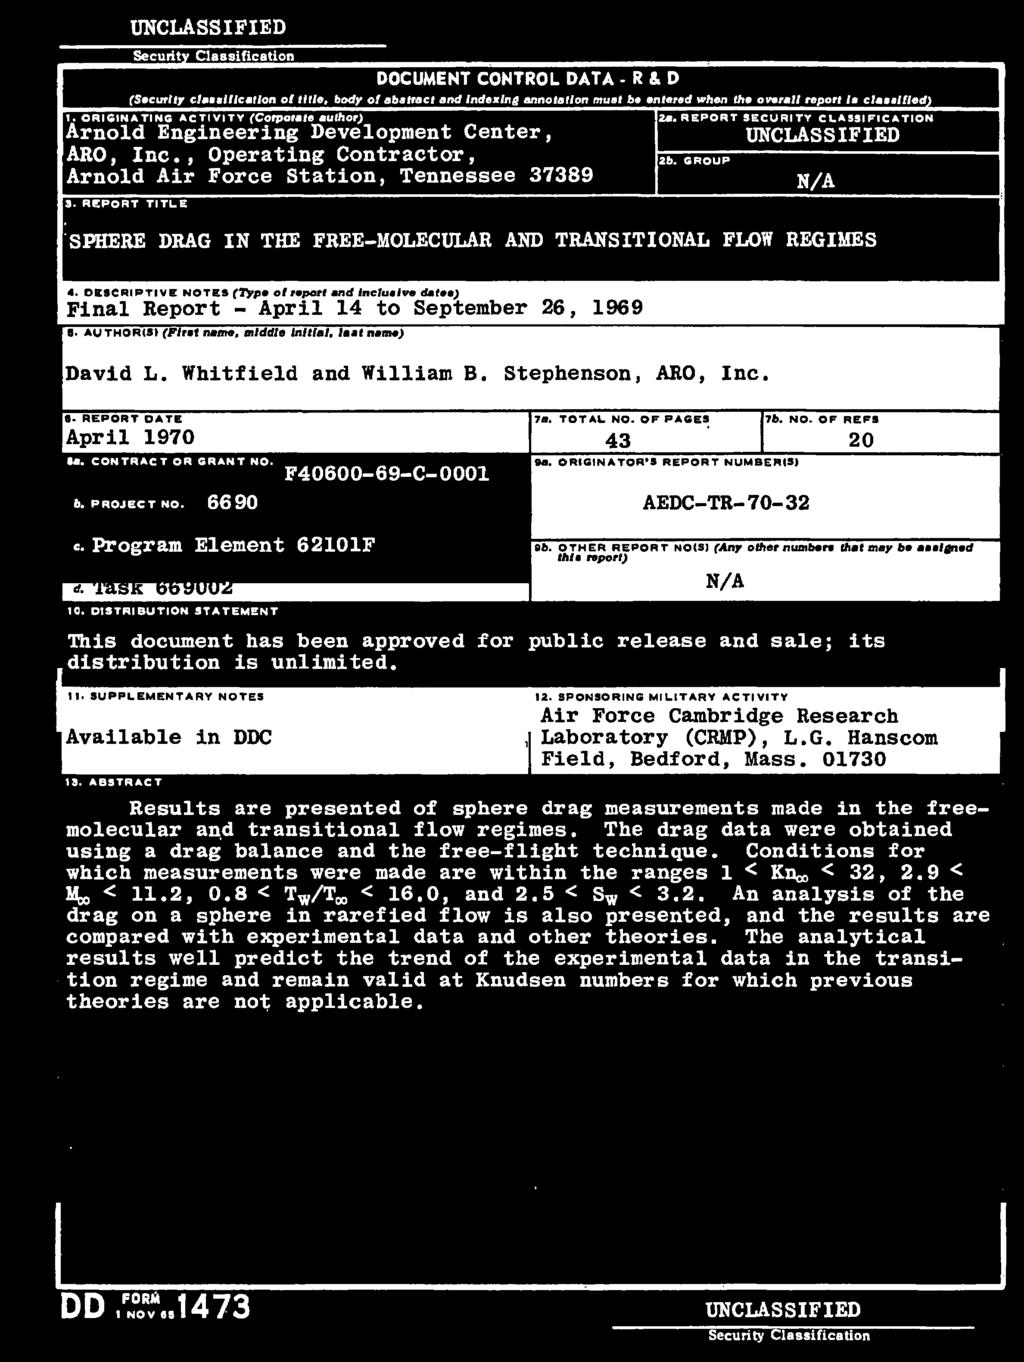 Stephensn, ARO, Inc. N/A 6. REPORT DATE April 1970 8a. CONTRACT OR GRANT NO. b. PROJECT NO. 6690 F40600-69-C-0001 7a. TOTAL NO. OF PACES 7b. NO. OF REFS 43 20 9a.